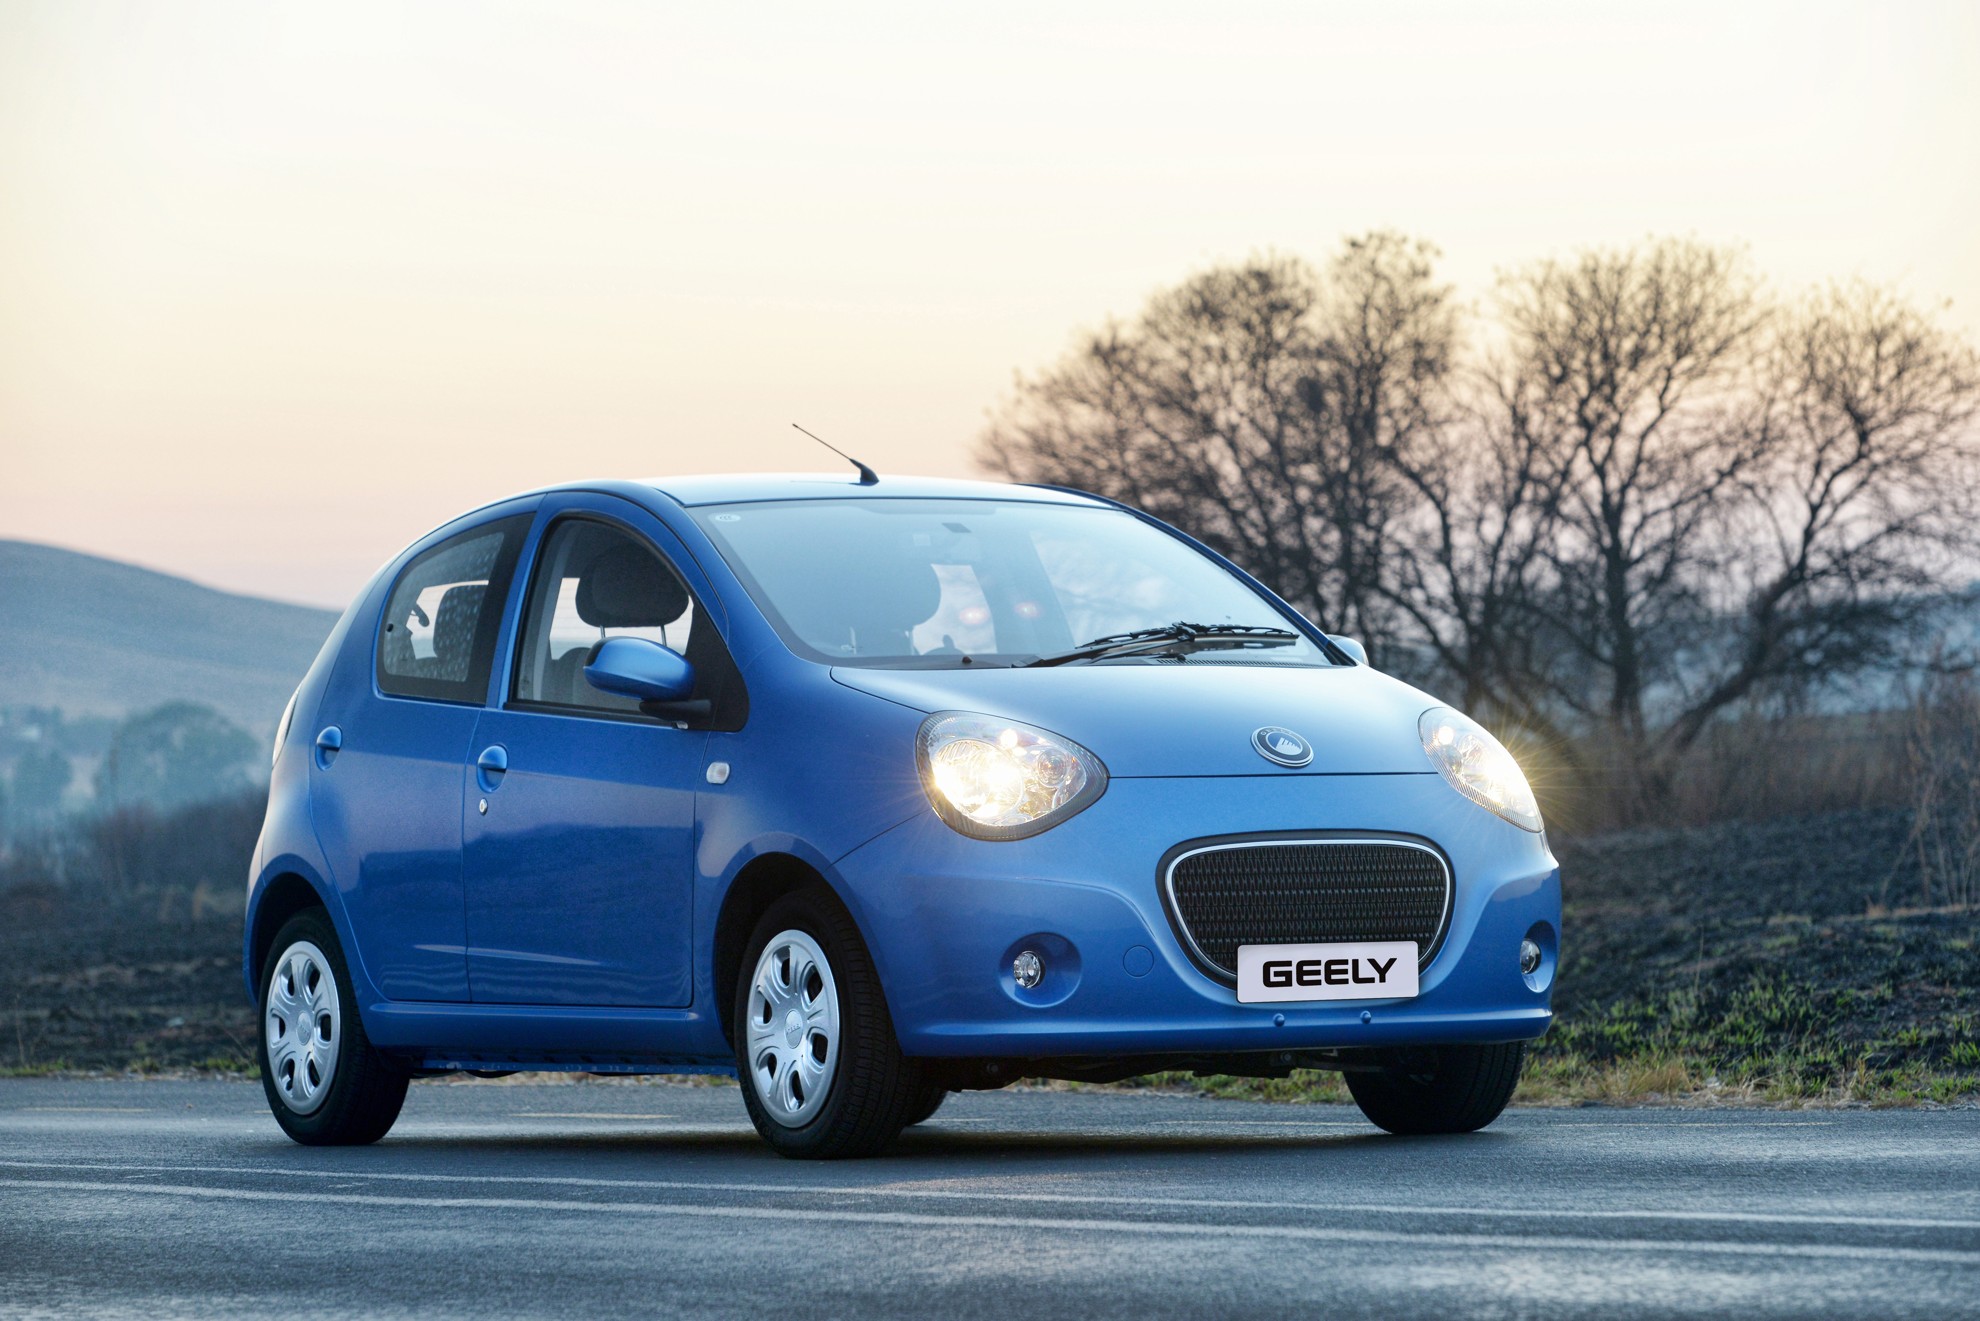 South Africa’s Cheapest Car – The New Geely